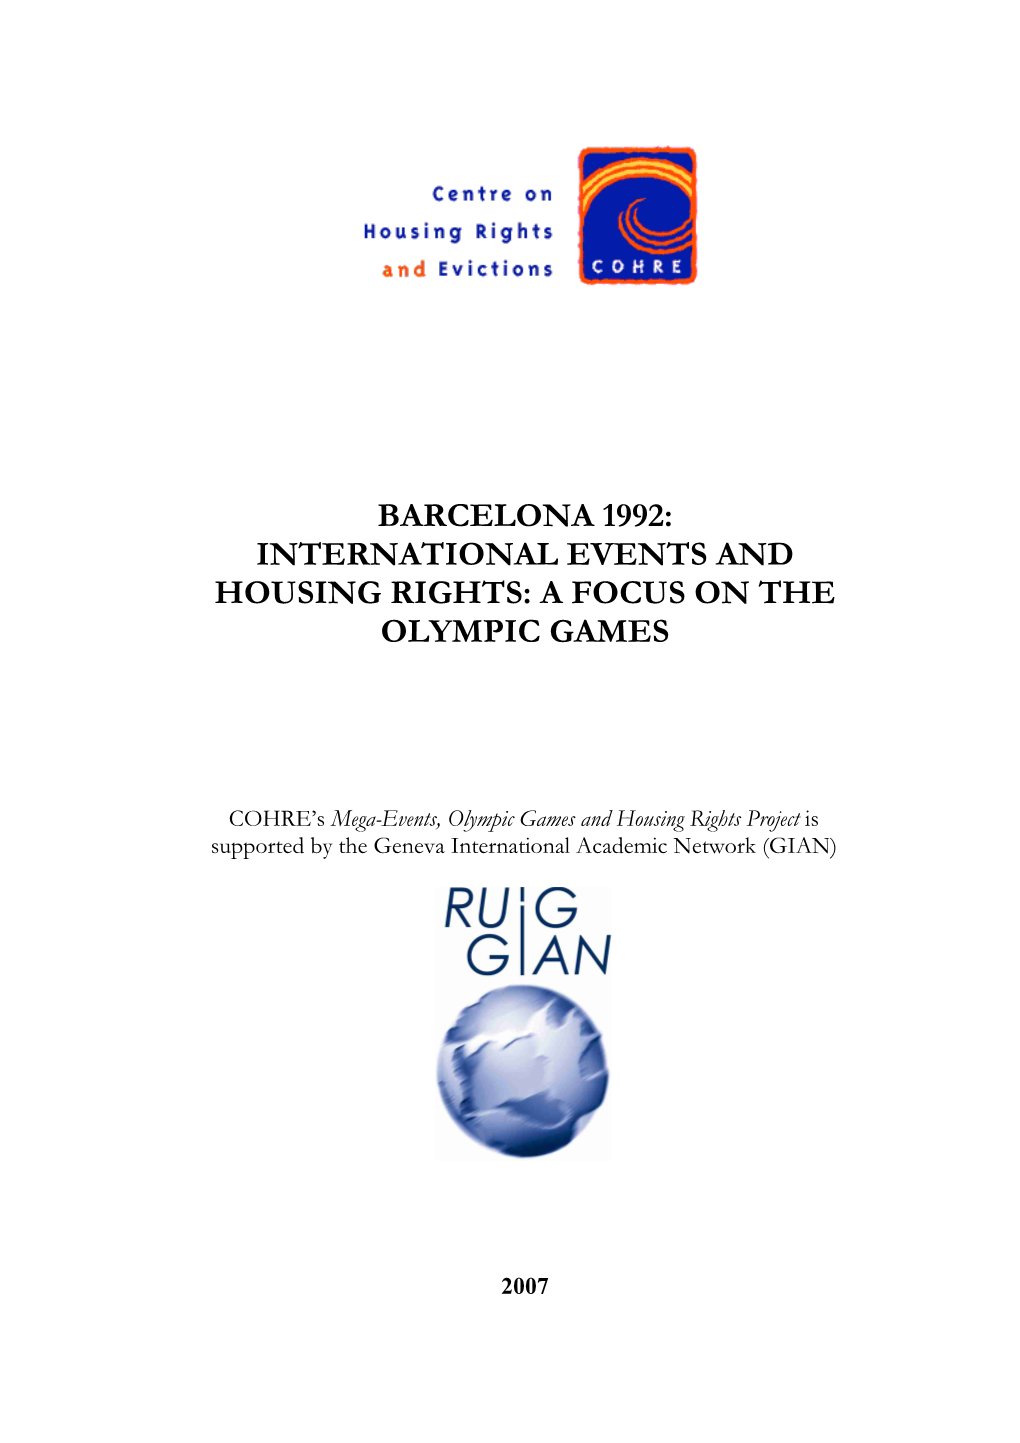 International Events and Housing Rights: a Focus on the Olympic Games